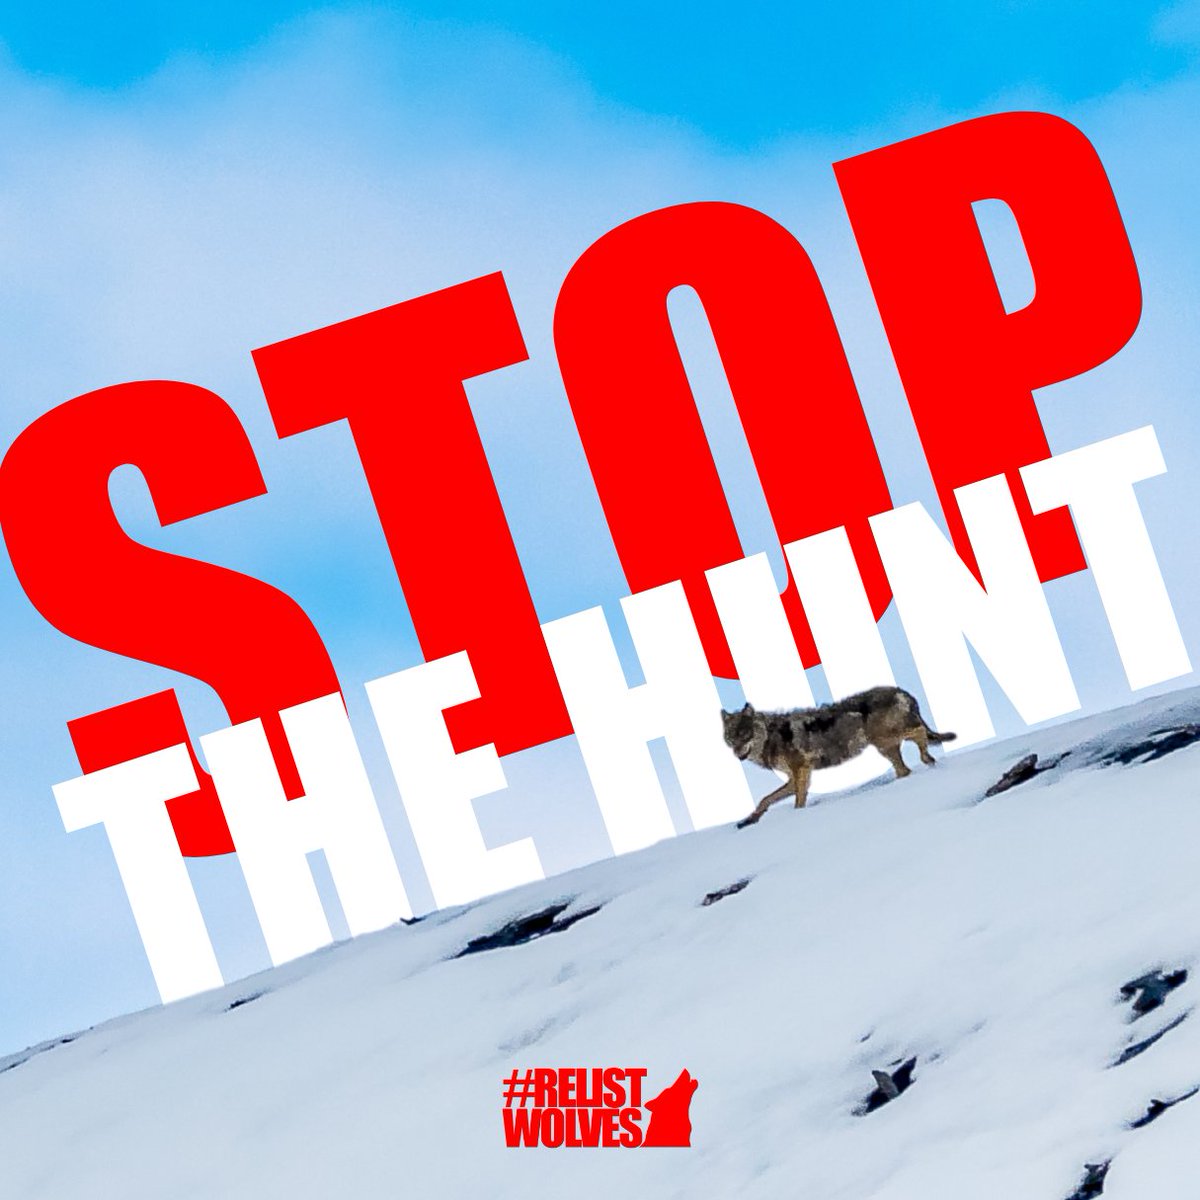 While most major wolf hunting seasons have ended, hunting is permitted year-round in much of WY & ID. Despite there only being an est. 6,000 wolves in the contiguous U.S., over 4k have been hunted down since 2020. We must #StopTheHunt. Take action today at RelistWolves.Org